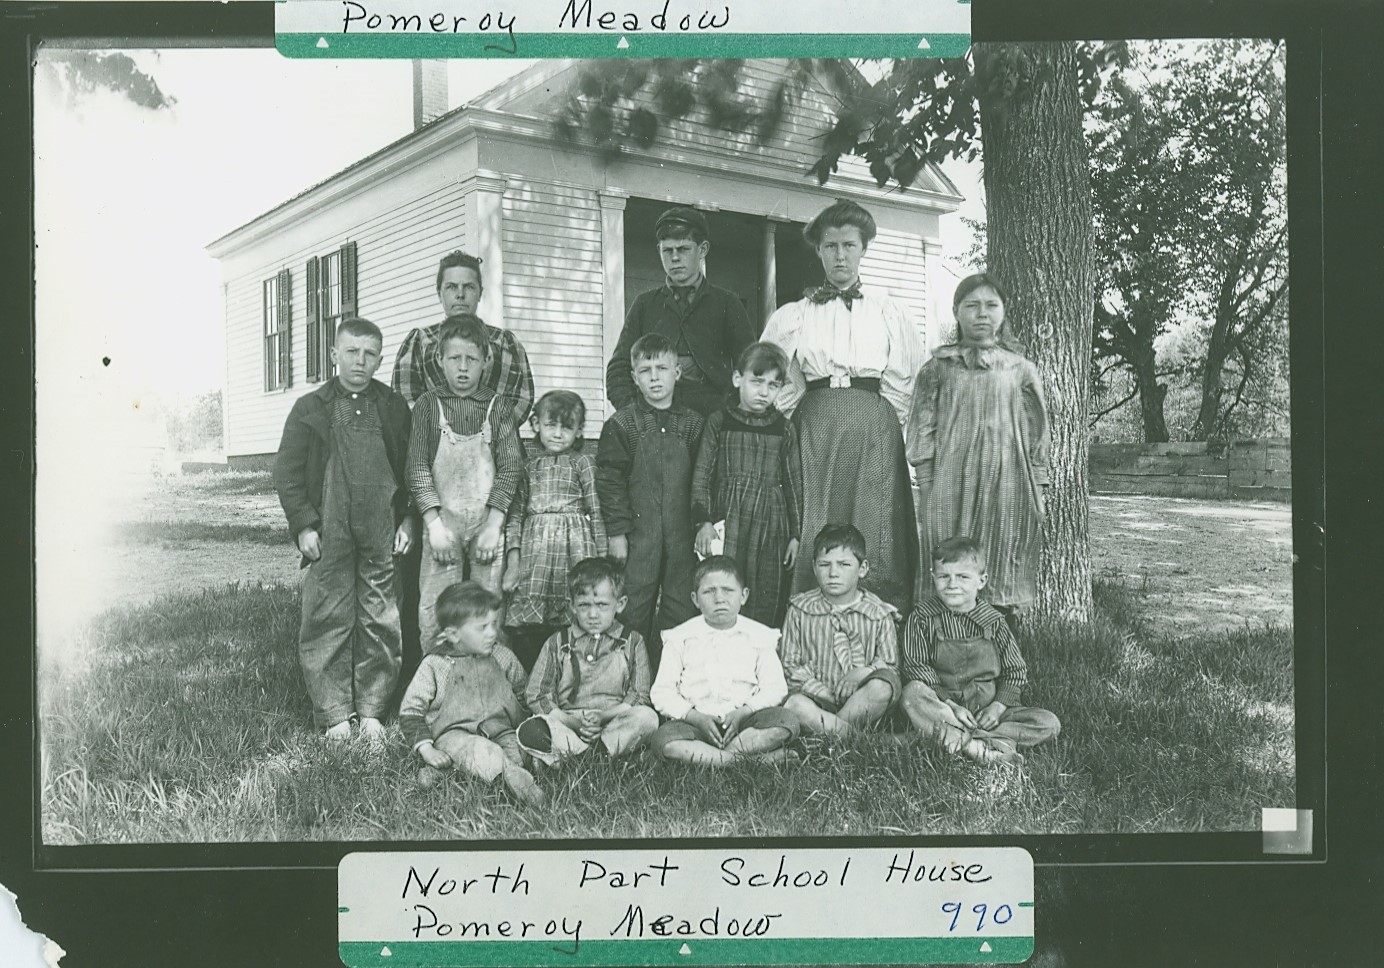 North Part School #2 - 121 Pomeroy Meadow Rd. - Corner Glendale Rd. Moved to Conant Park by Historical Commission 1-9-1975. List of students-see Southampton Historical Society. Teacher Florence Hannum..